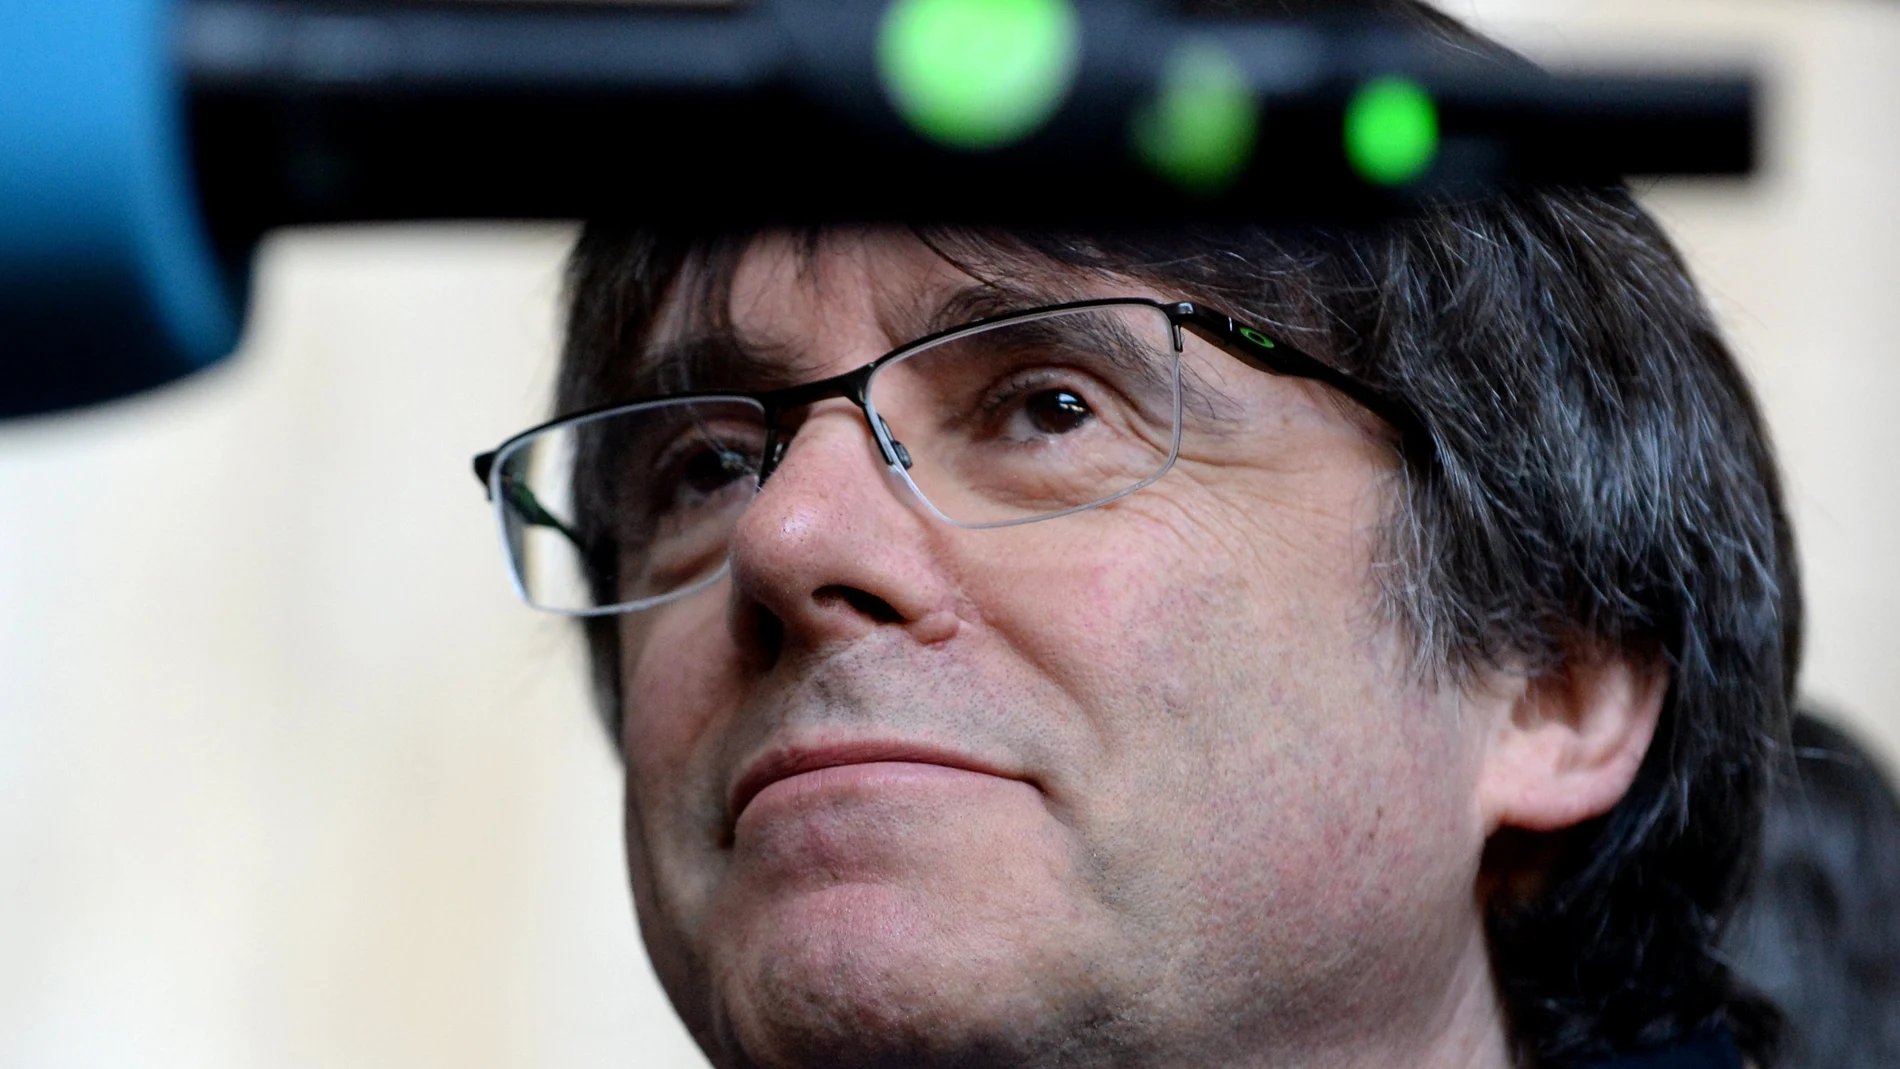 Former Catalan leader Carles Puigdemont talks to the media at the Justice Palace in Brussels, Belgium